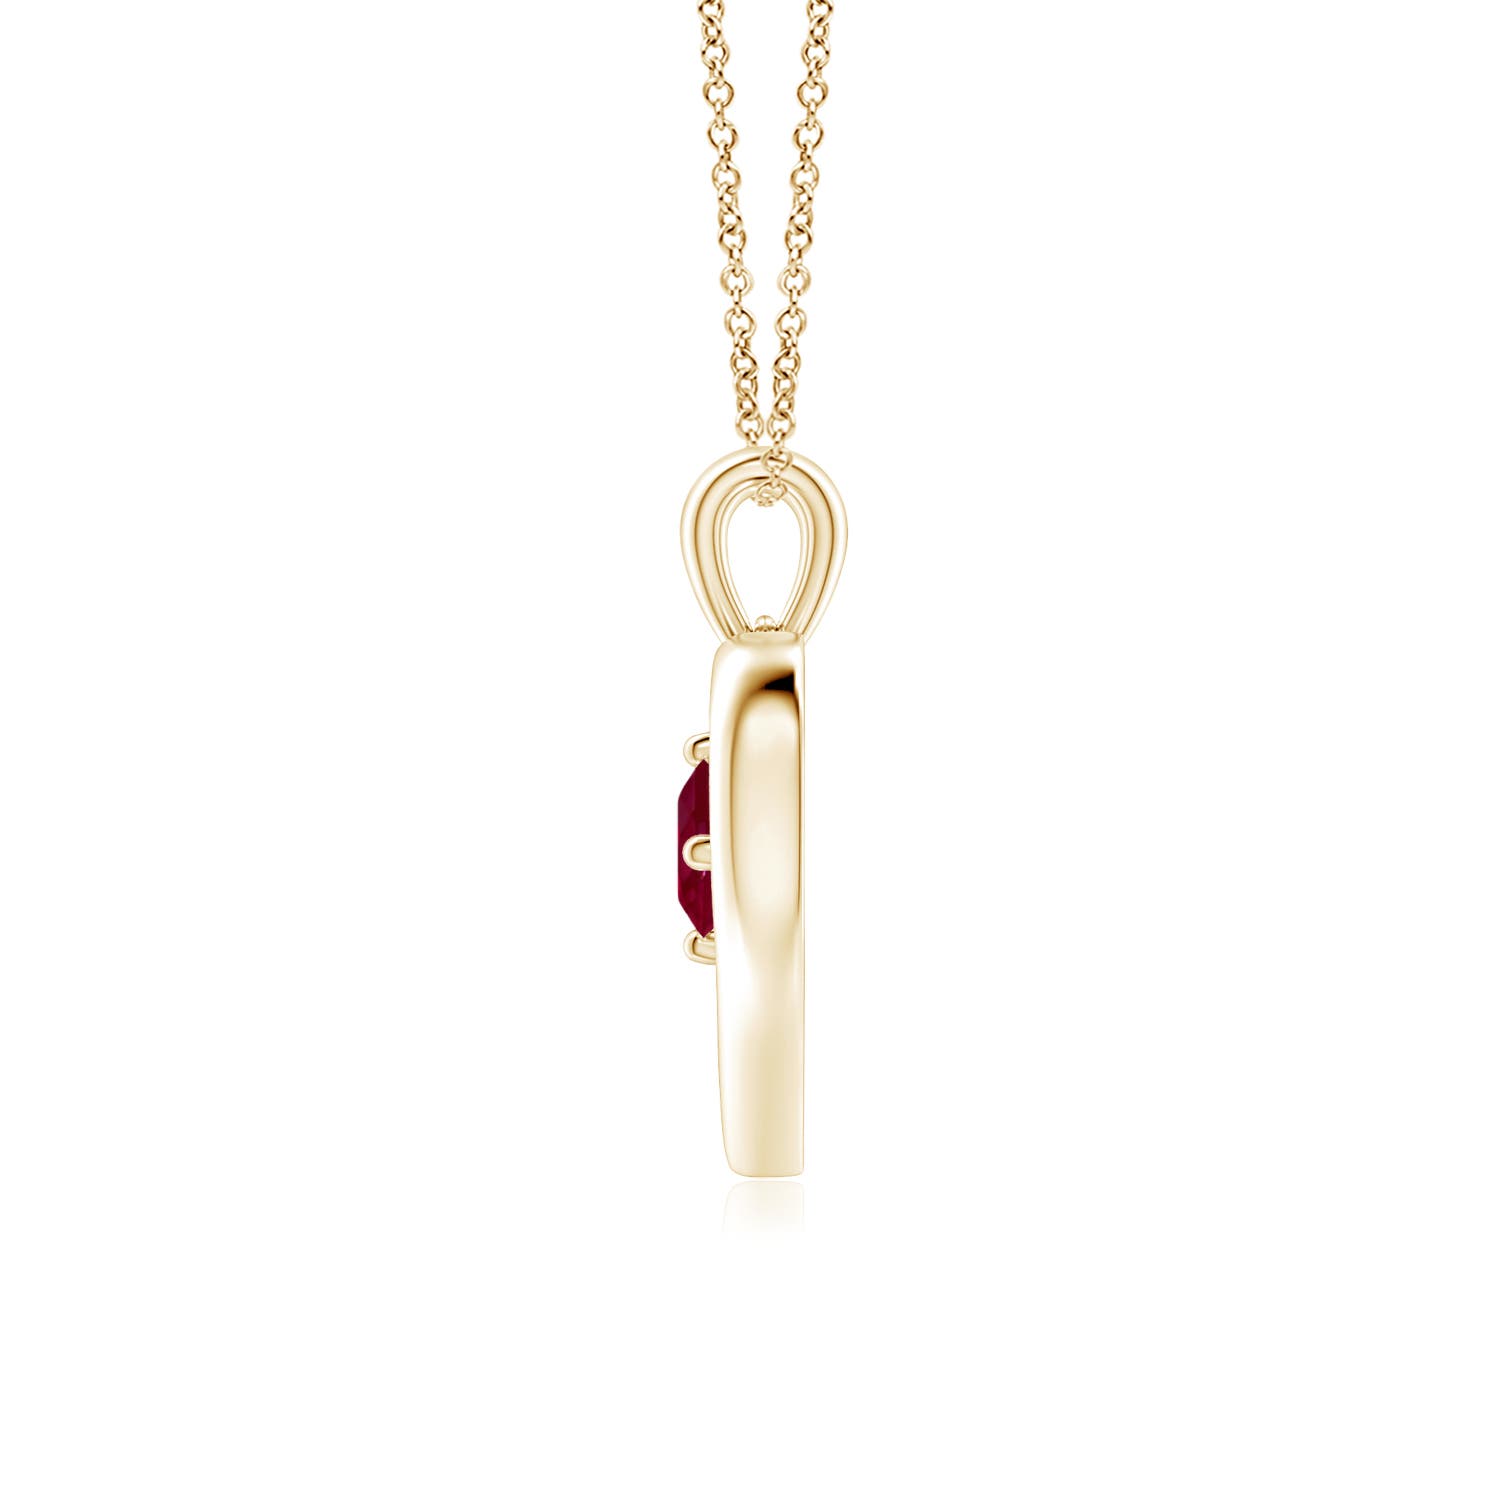 A - Ruby / 0.34 CT / 14 KT Yellow Gold